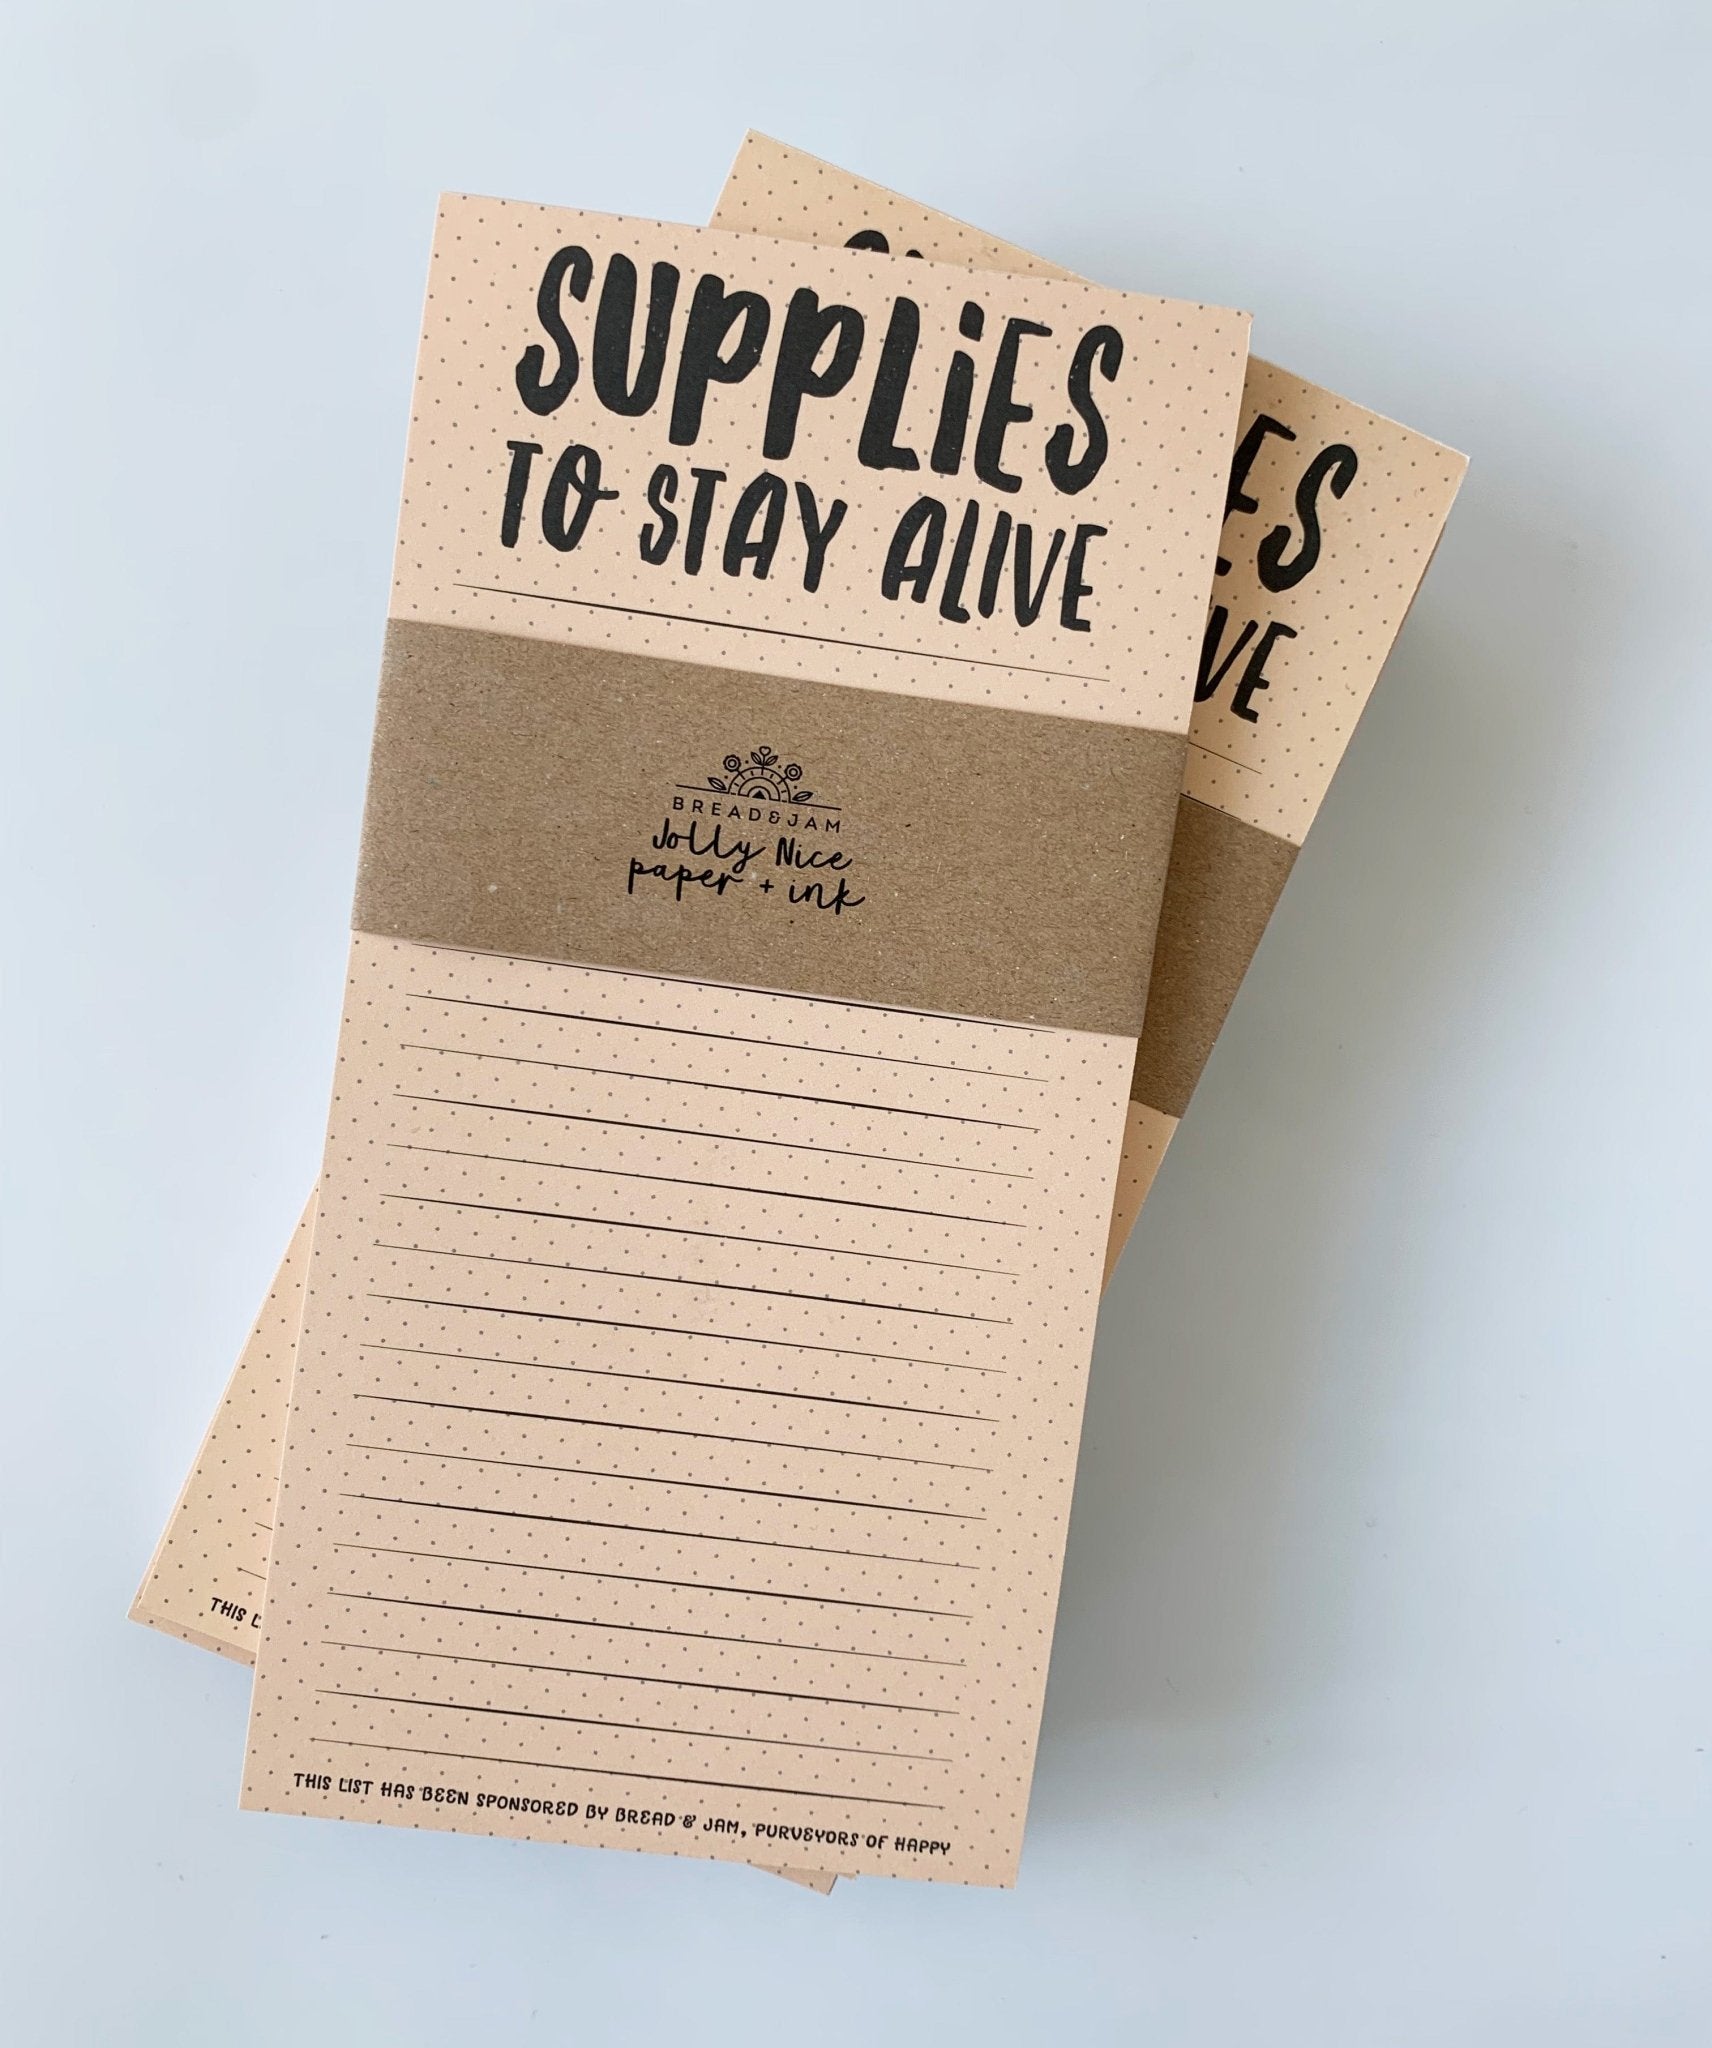 Supplies To Stay Alive Shopping List Pad - notebooks &amp; honey